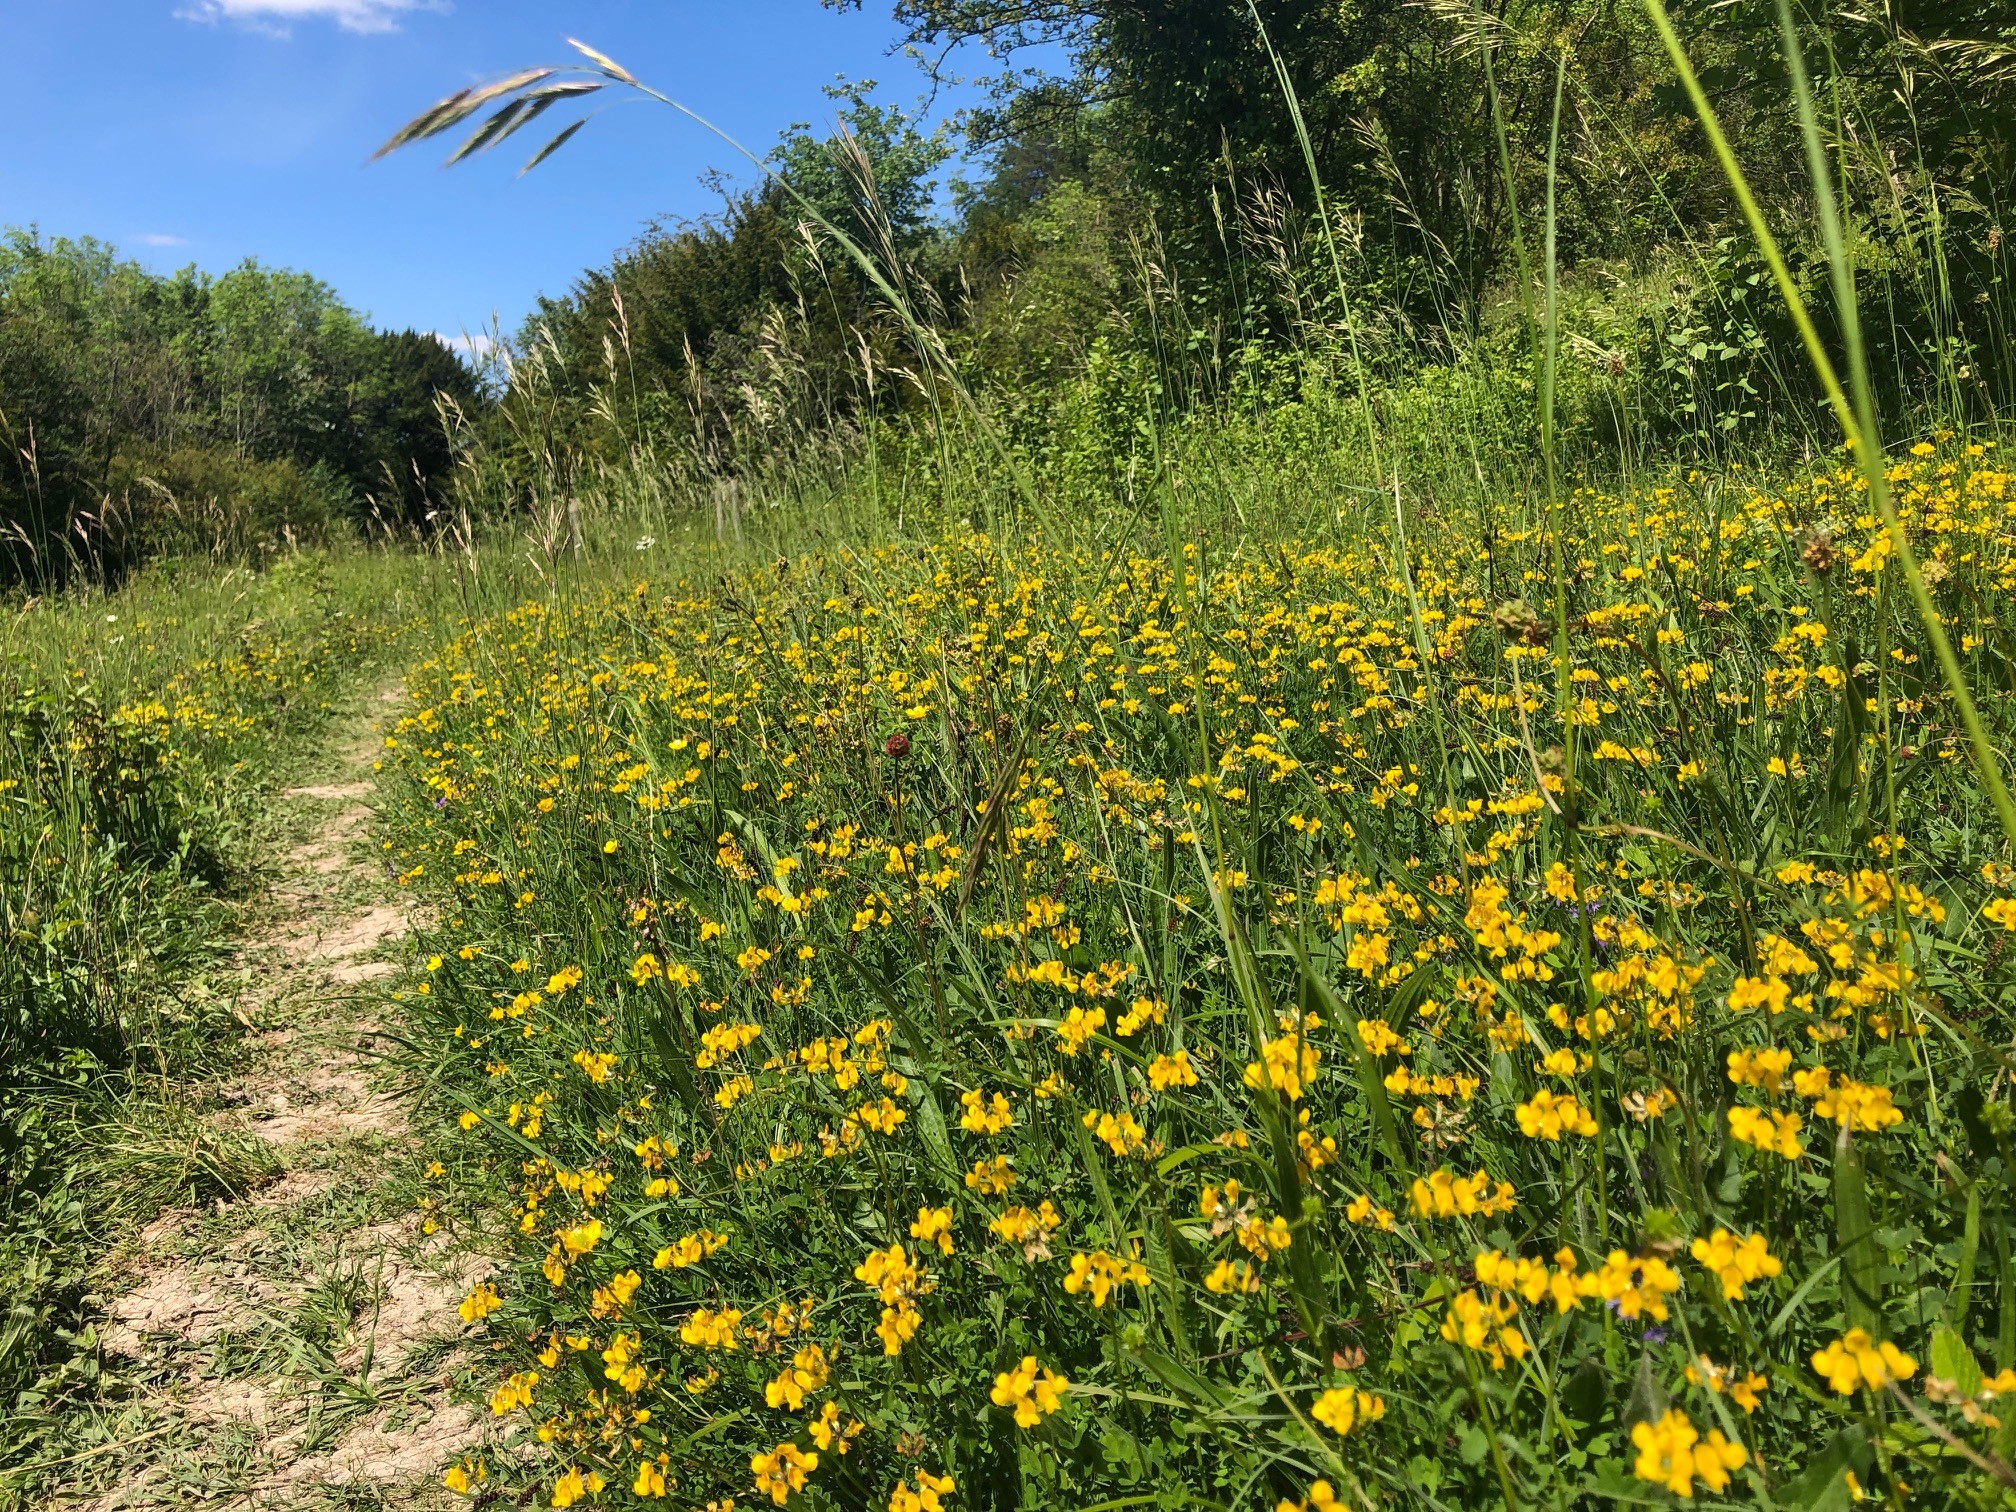 Narrow dirt path next to grassland with yellow flowers